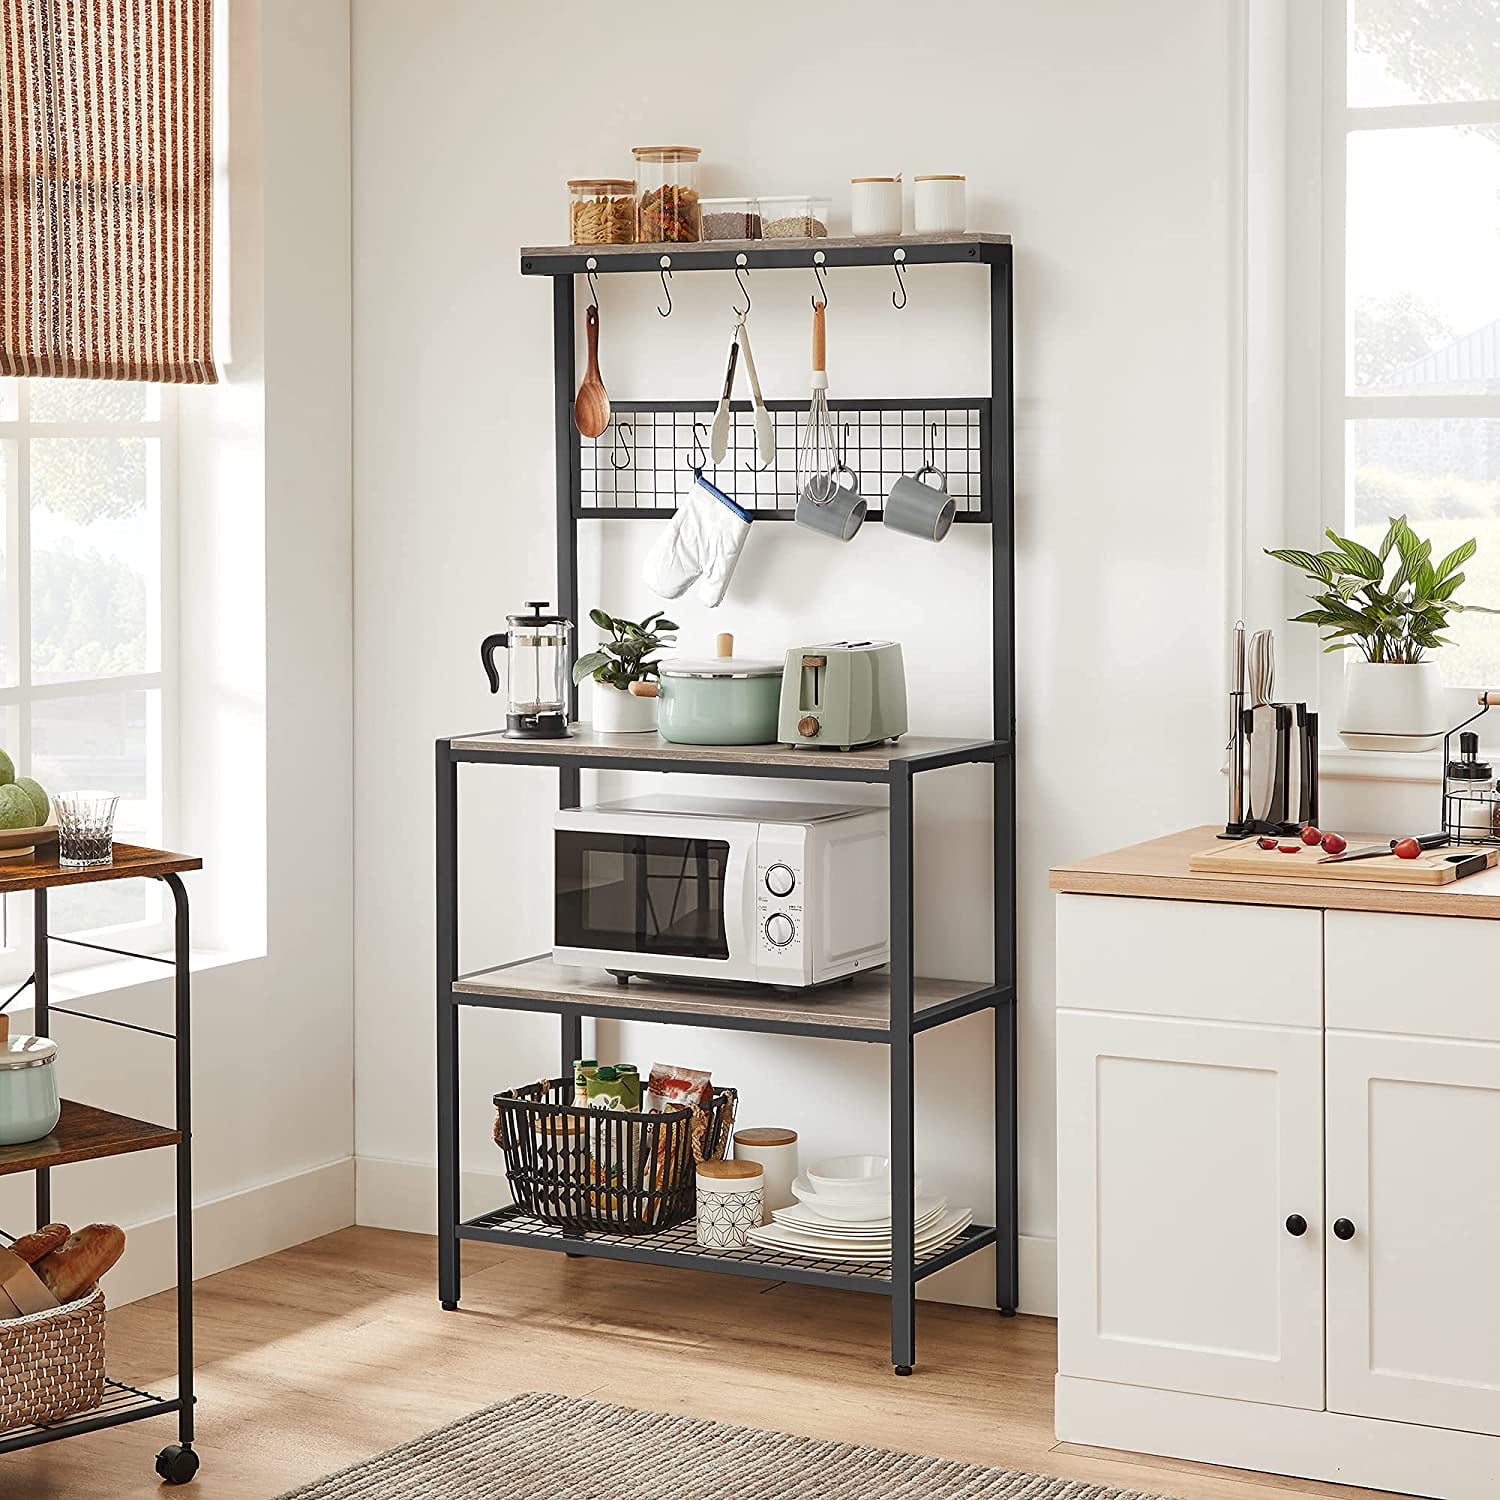 IRIS 67.72 in. Brown 4-shelf Baker's Rack with Storage Adjustable Shelves,  Coffee Station, Small Closet Organizer 590063 - The Home Depot